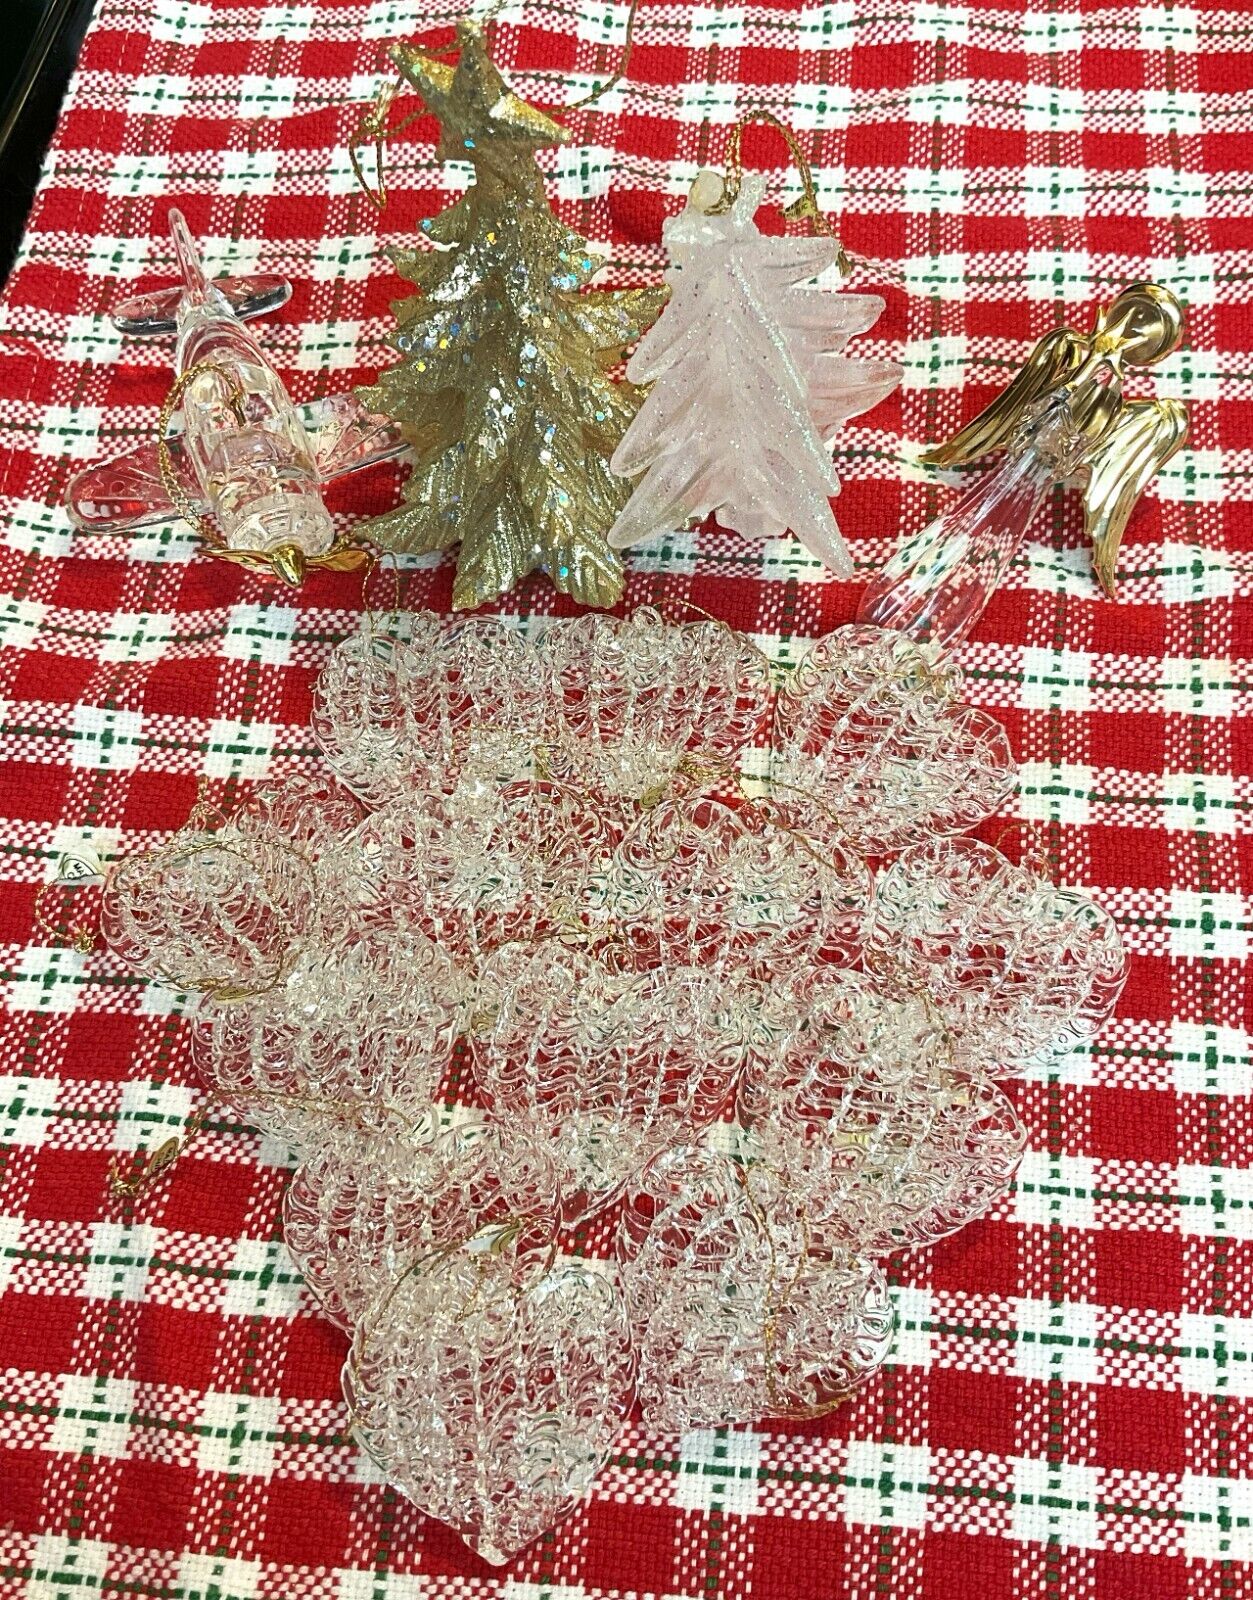 Six Lots of Vintage Glass/Acrylic Christmas Ornaments - Pick your Lot